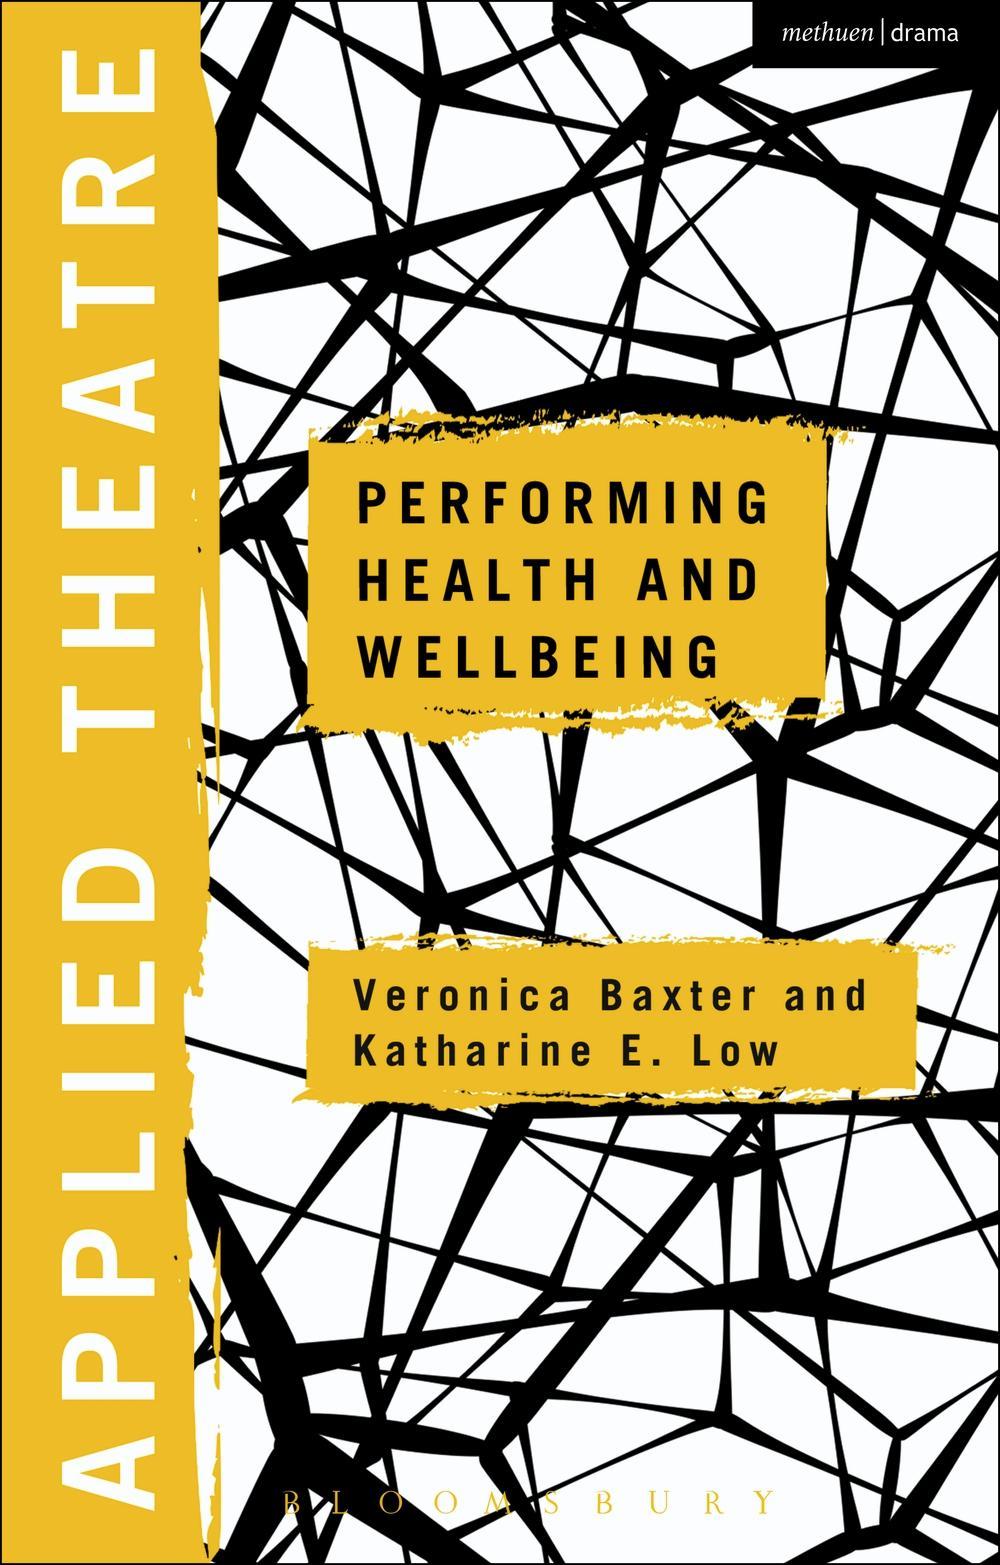 Applied Theatre: Performing Health and Wellbeing - Veronica Baxter